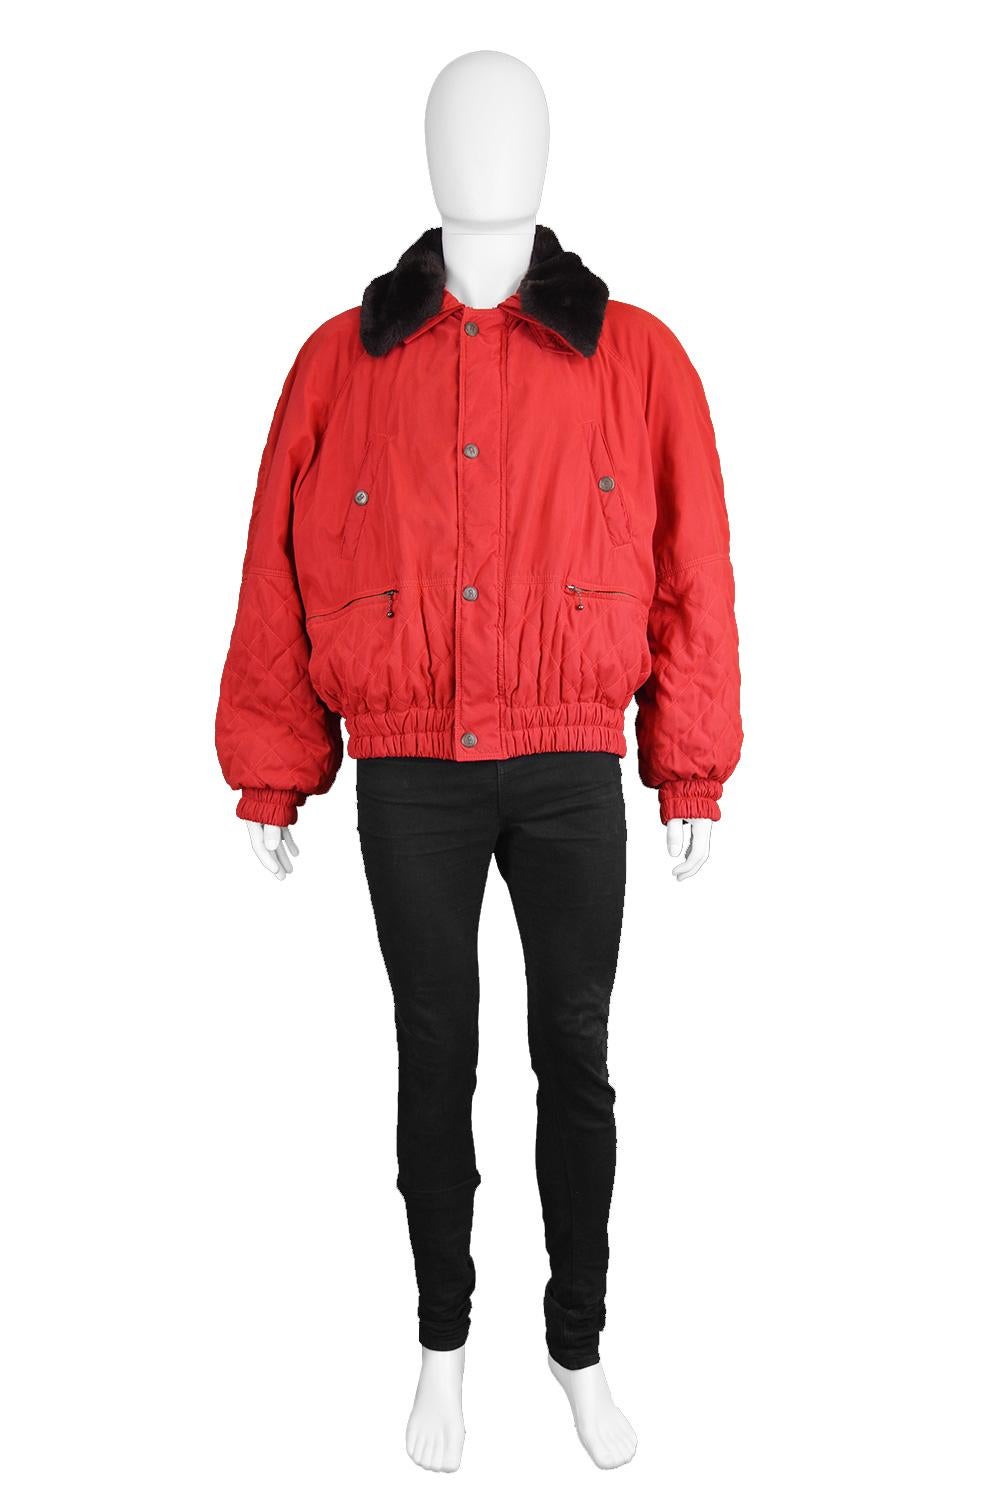 Oliver by Valentino Men's Vintage Red Matelassé Bomber Jacket Coat, 1980s

Please Click 'Continue Reading' below for full description and size. 

Size: Marked 54 which is roughly a men's XL to XXL.
Chest - Up to 54” / 137cm (has a loose fit around